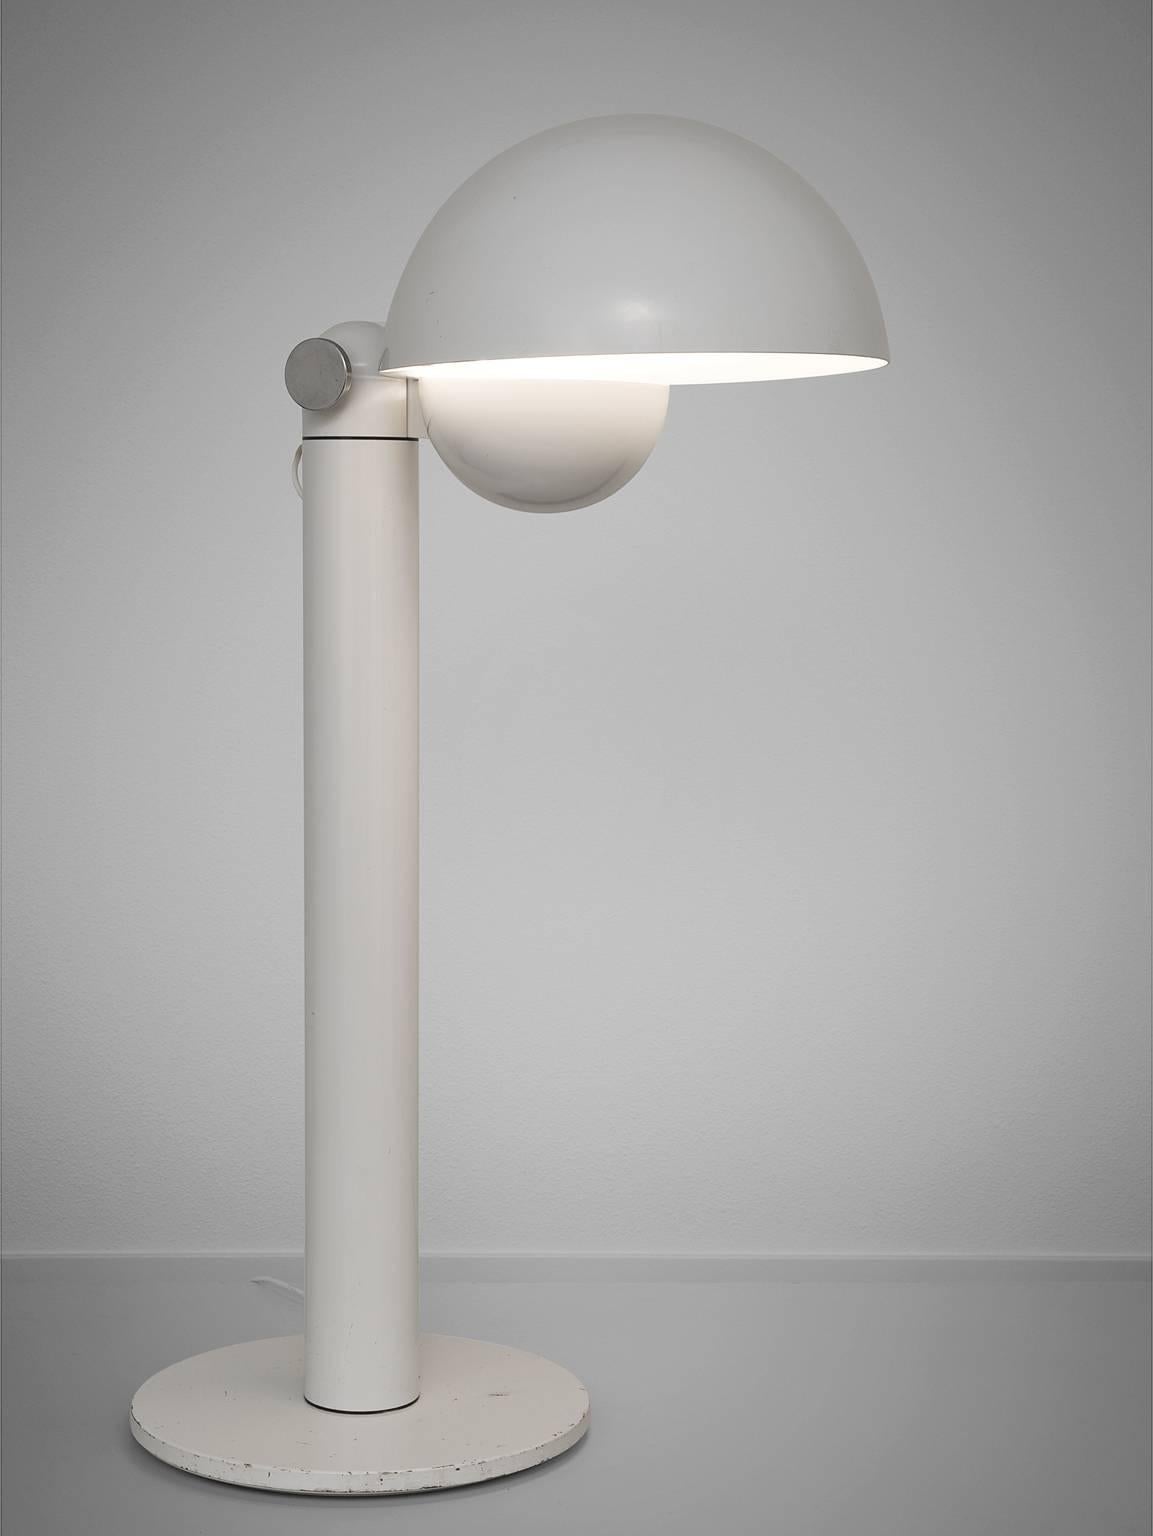 Floor lamp model 'Cuffia' floor lamp designed by Francesco Buzzi, manufactured by Bieffeplast, Italy, 1969.

Postmodern lamp made of white lacquered aluminum with two adjustable shades.
The two halve bowls as shades are adjusting and so the light